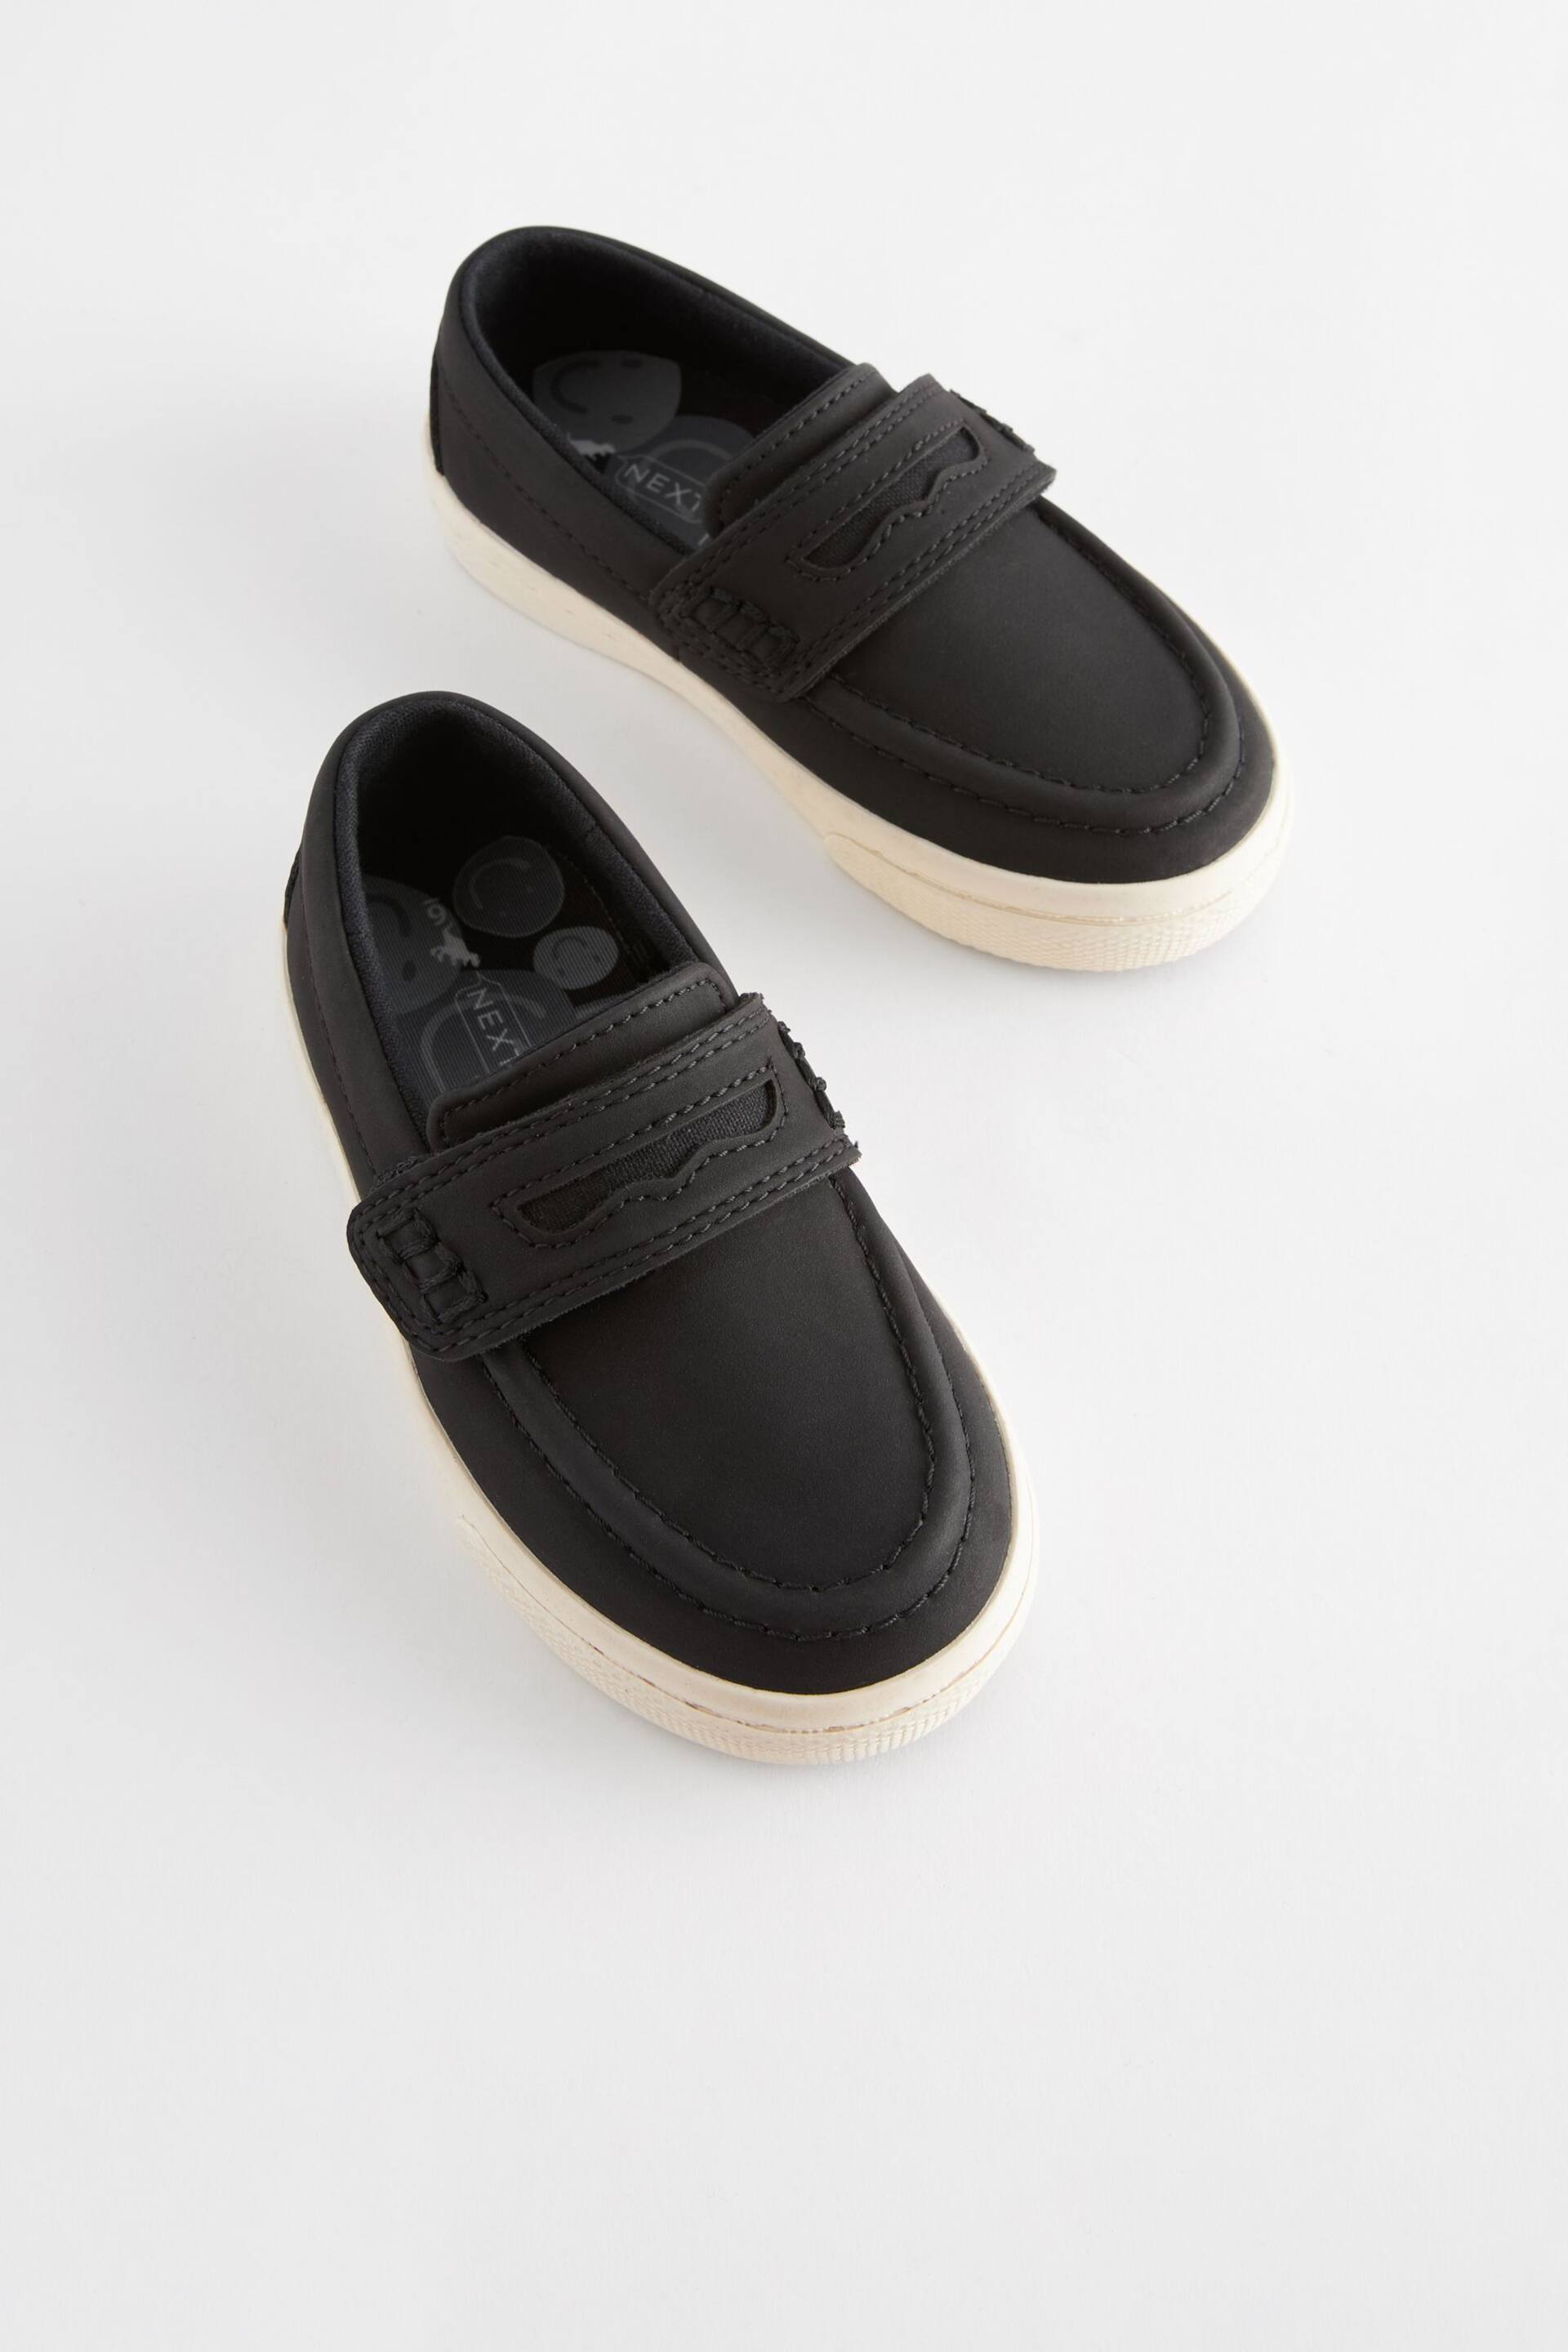 Black Standard Fit (F) Penny Loafers - Image 1 of 6